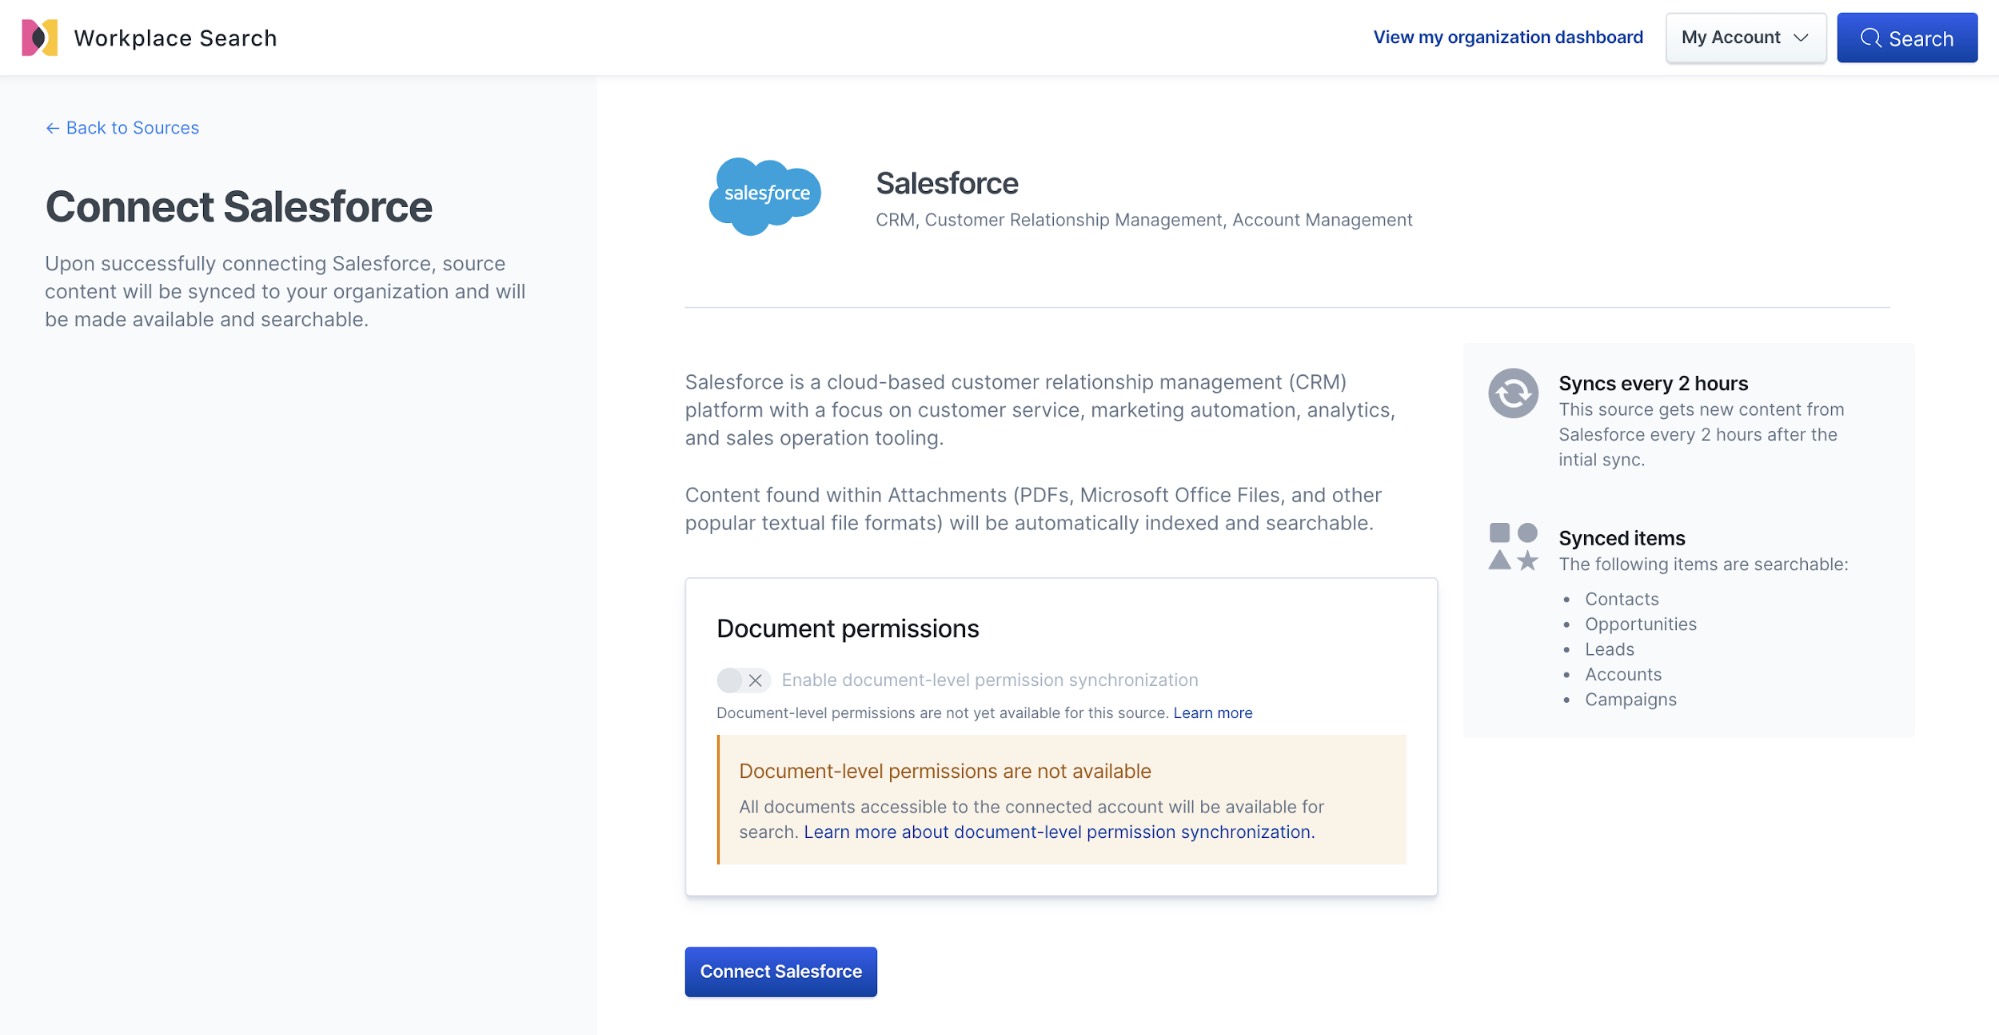 Easily connecting Salesforce to Workplace Search